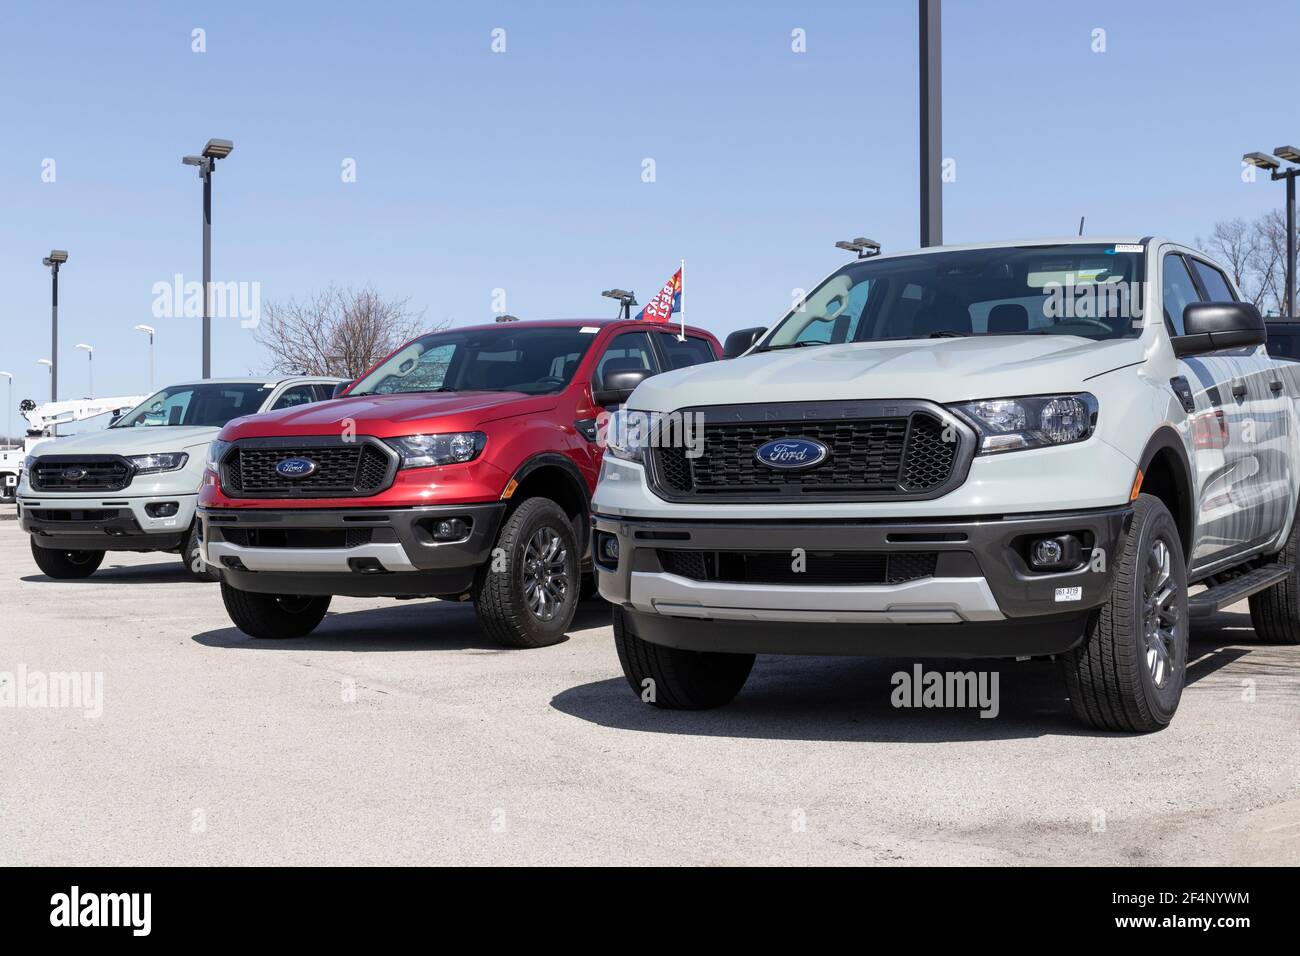 Fishers - Circa March 2021: Ford Ranger pickup truck display at a dealership. The Ranger nameplate has been used on multiple light duty trucks models Stock Photo